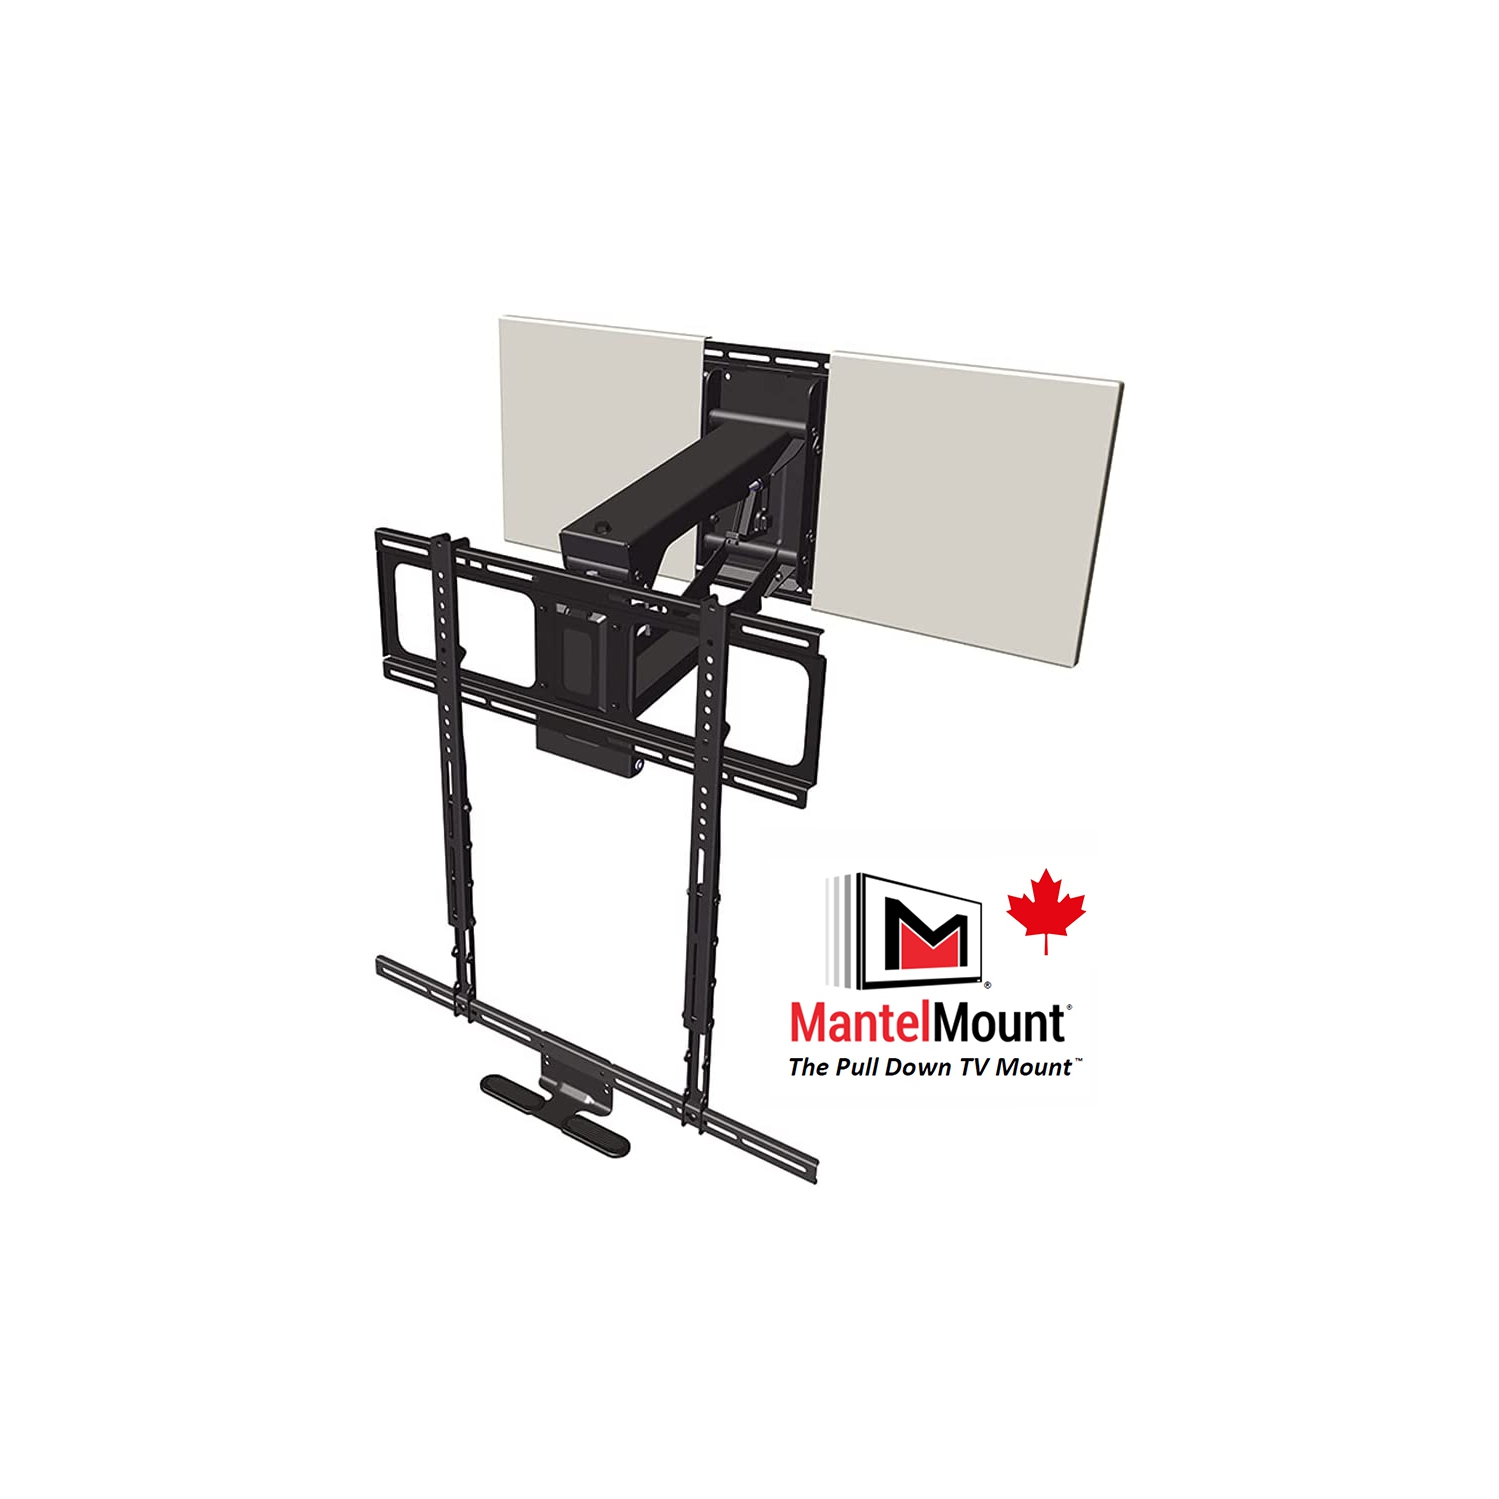 MantelMount MM700 Premier Series Above Fireplace Pull Down TV Mount for 45"-90" TVs Over Mantel